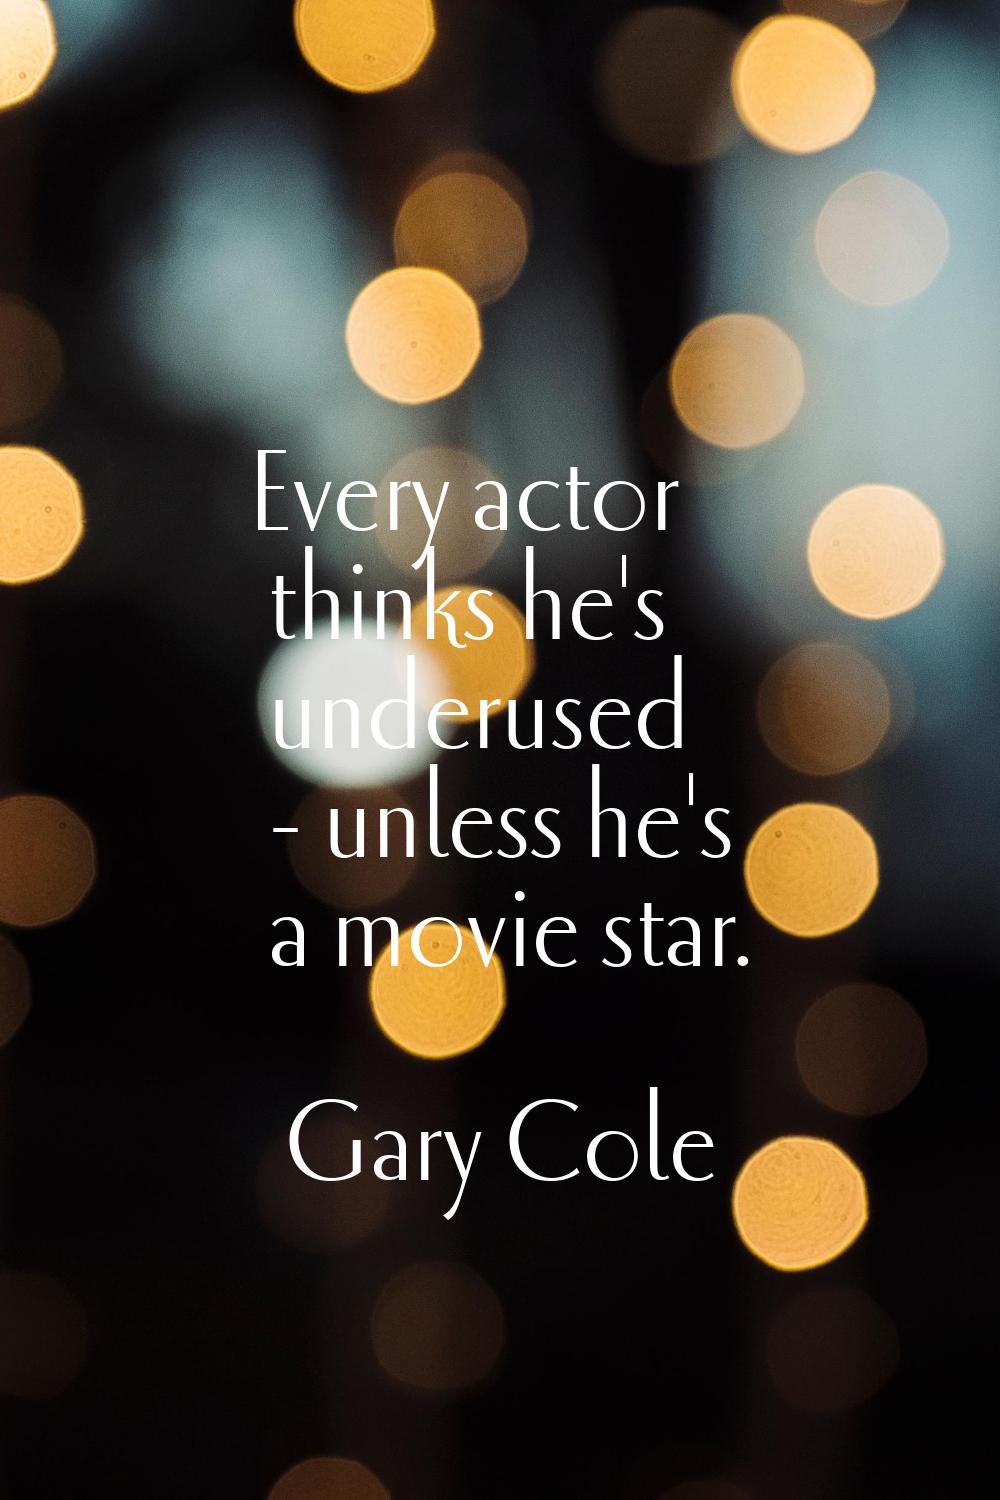 Every actor thinks he's underused - unless he's a movie star.